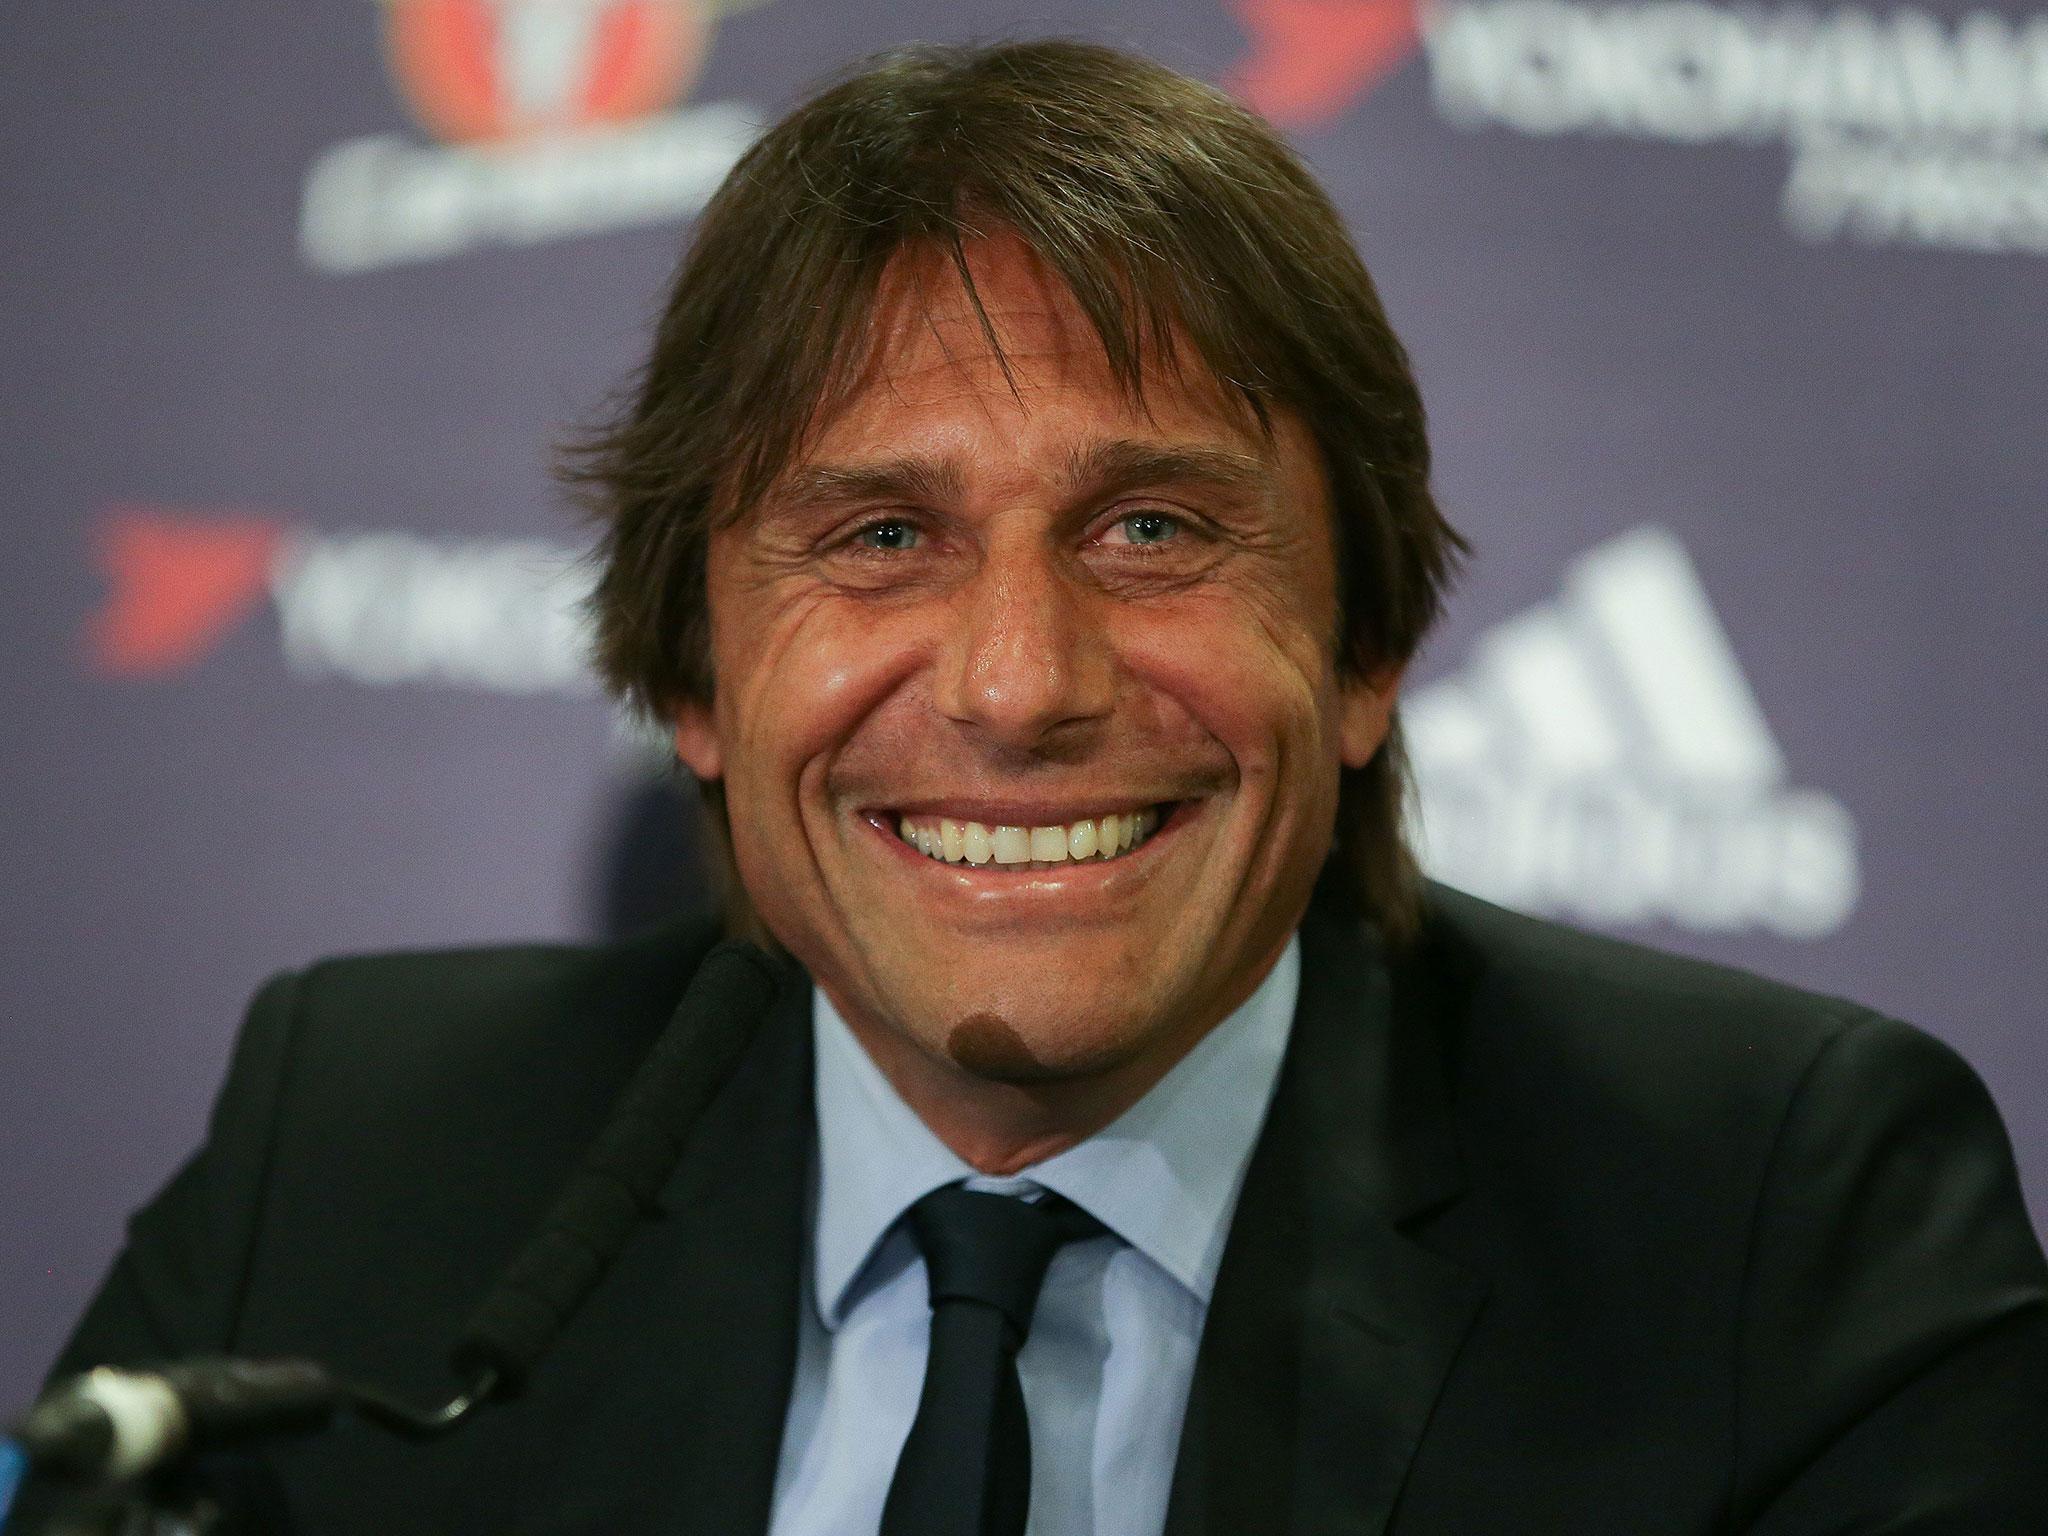 Conte was all smiles after another important win for Chelsea